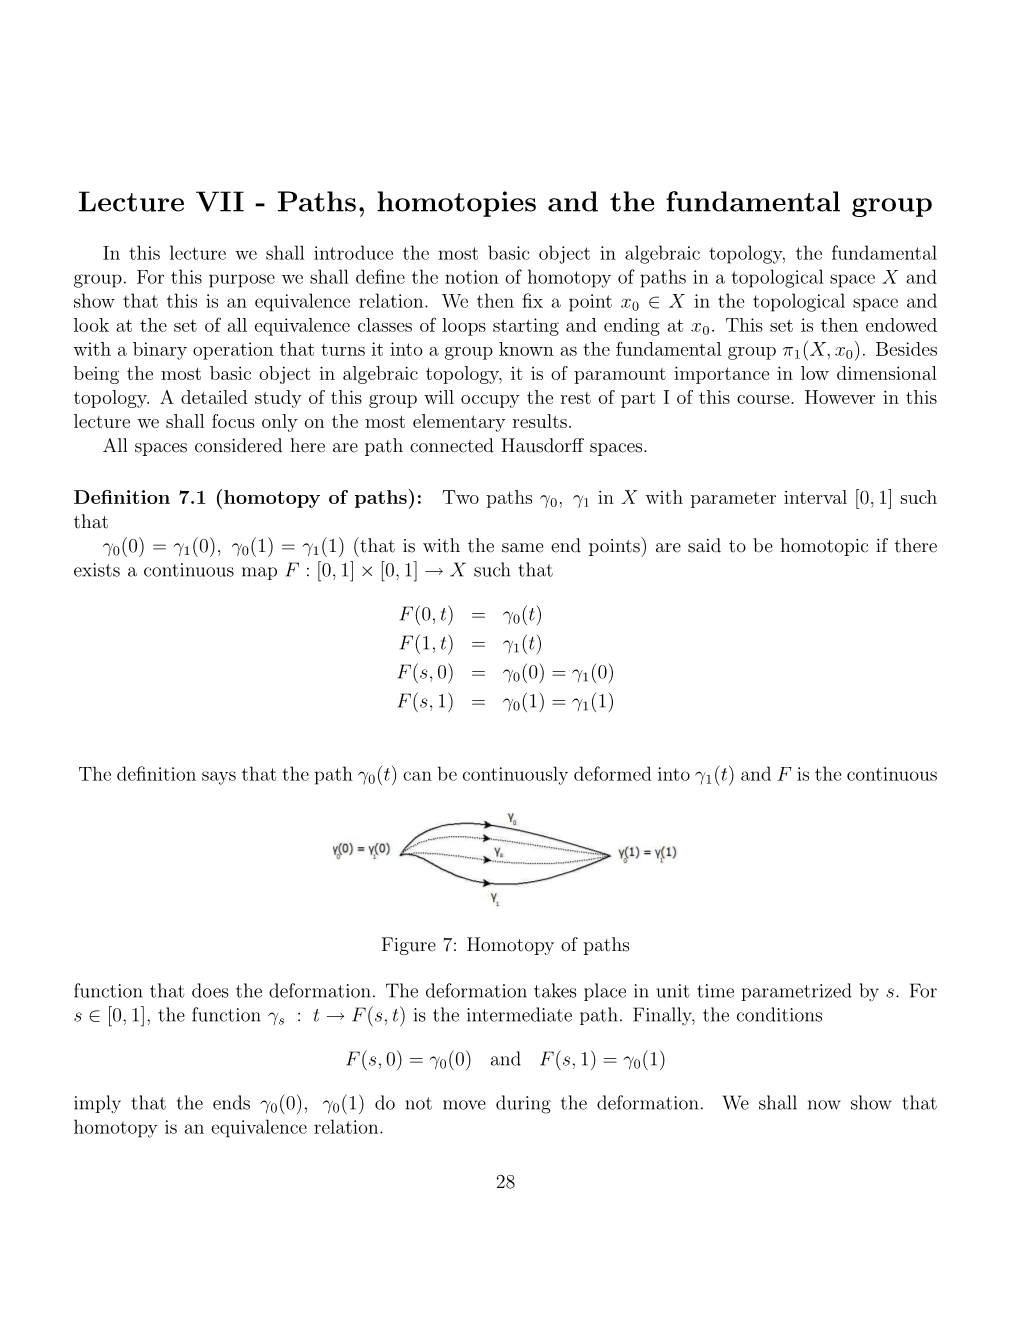 Lecture VII - Paths, Homotopies and the Fundamental Group